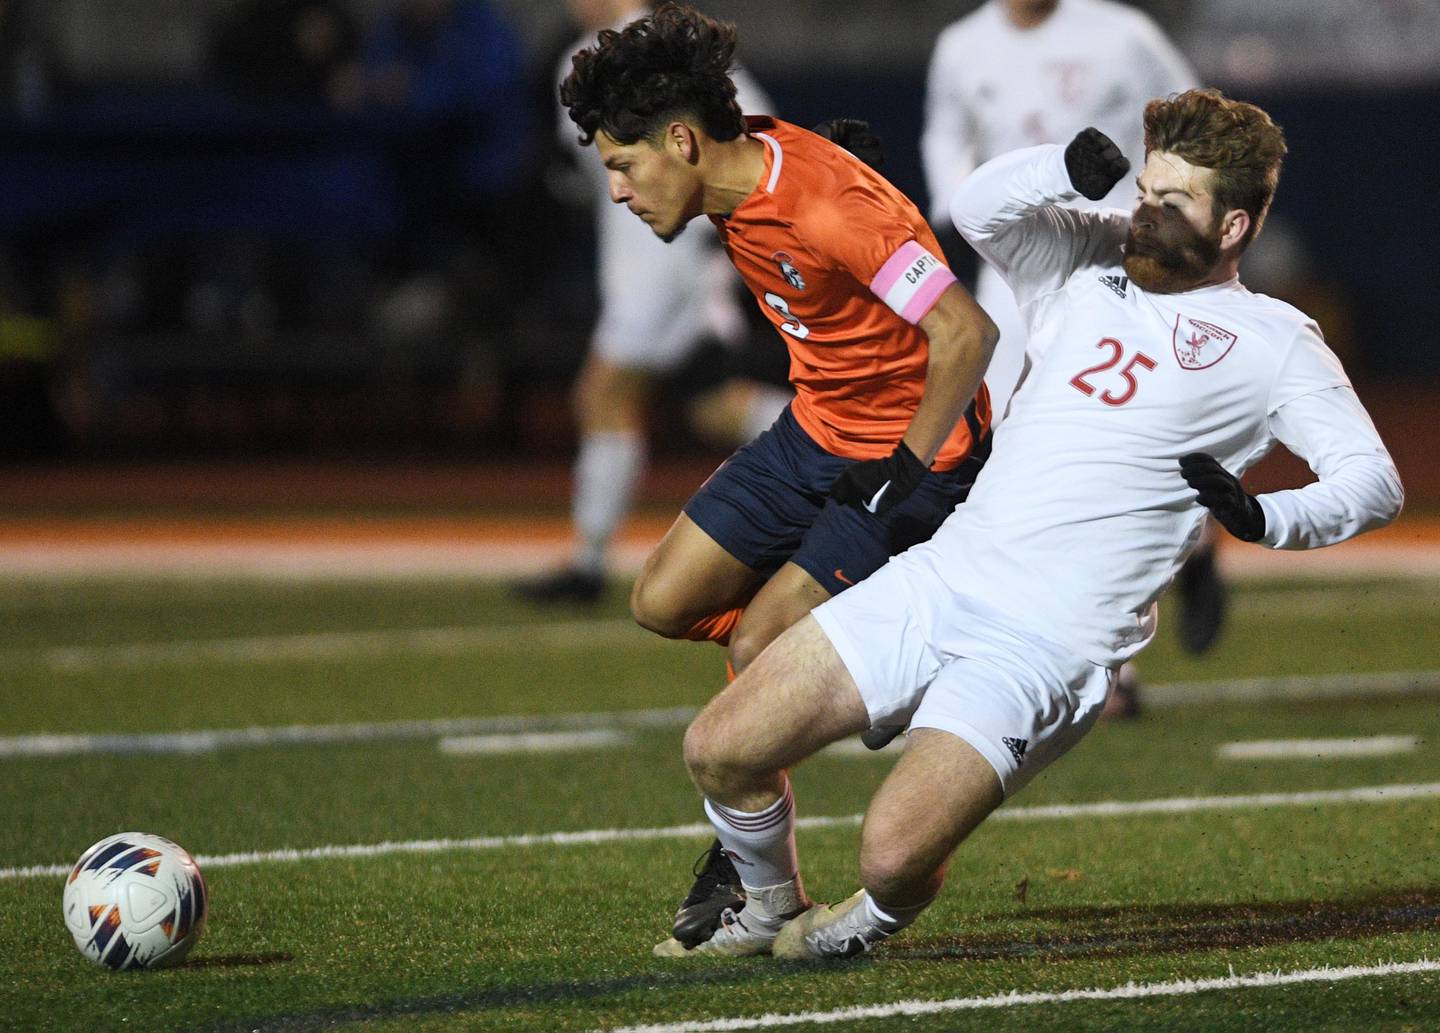 John Starks/jstarks@dailyherald.com
Romeoville’s Joseph Duarte steps on the foot of Naperville Central’s Sean O'Reilly in the Class 3A championship game of the boys state soccer tournament in Hoffman Estates on Saturday, November 5, 2022.